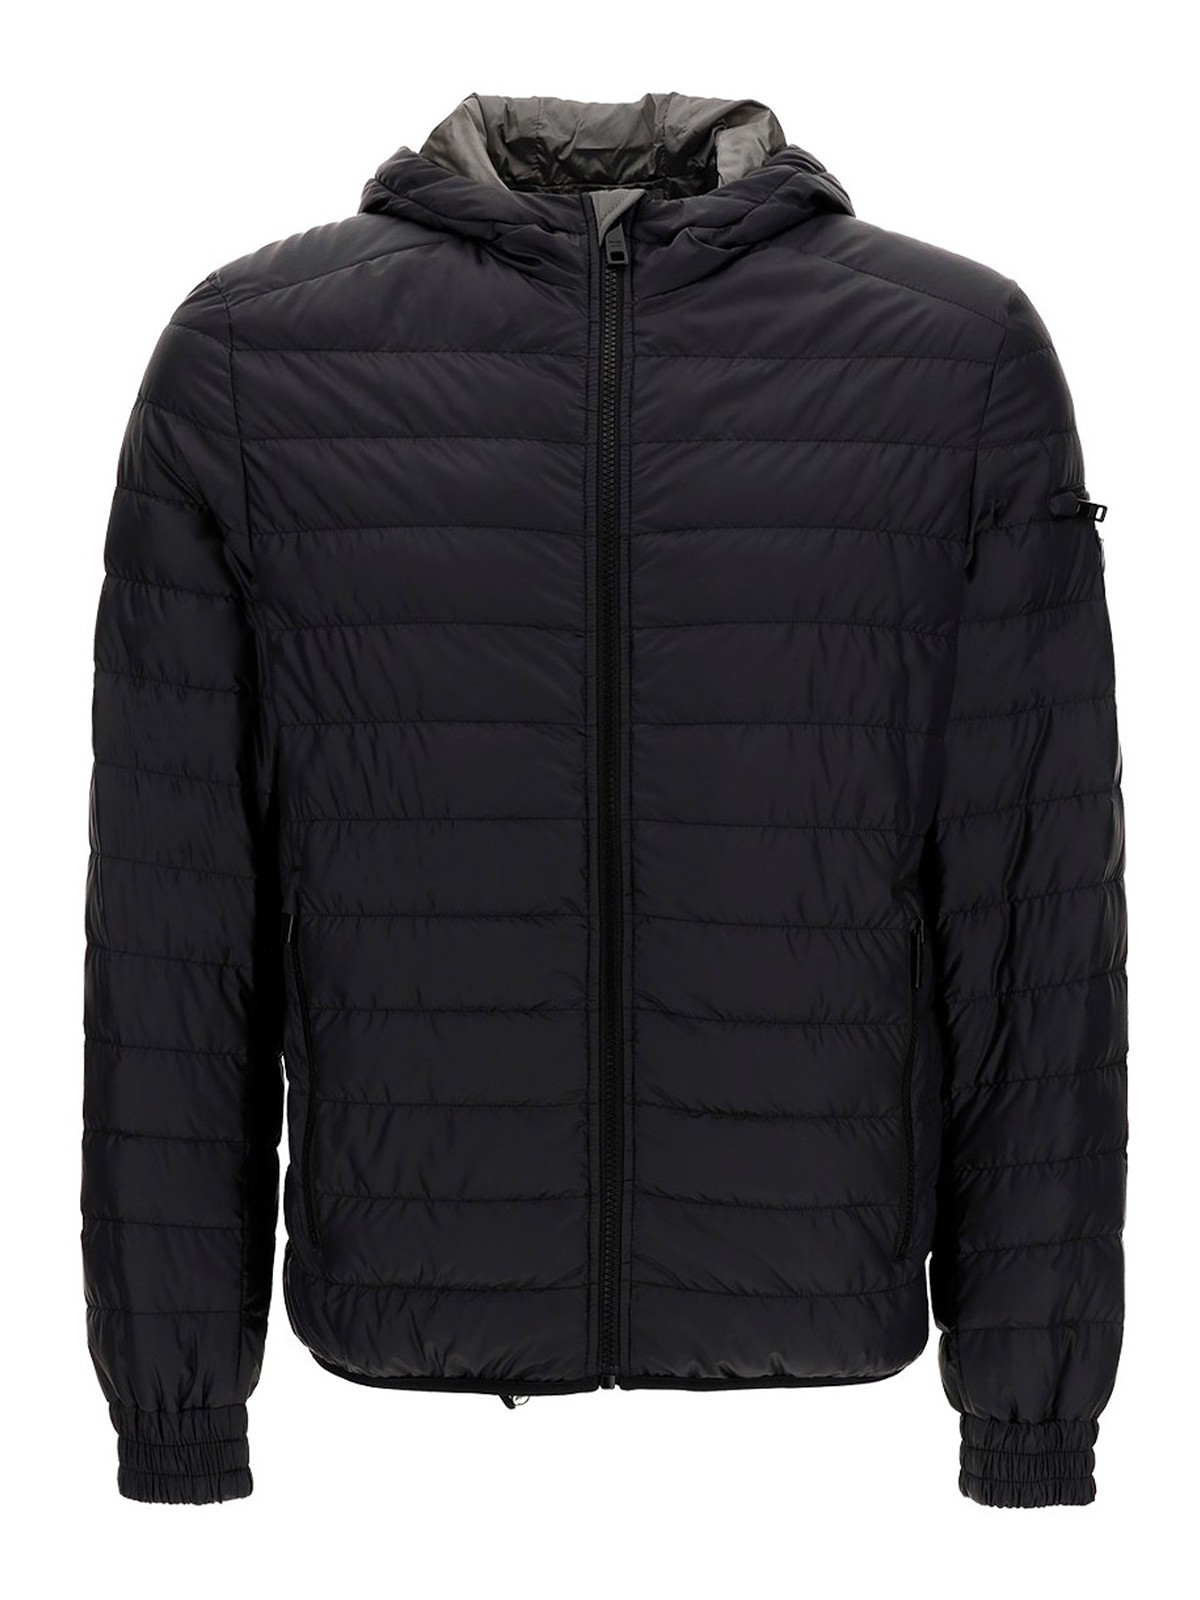 Padded jackets Prada - Lightweight quilted puffer jacket - SGN9581YNSF0A64